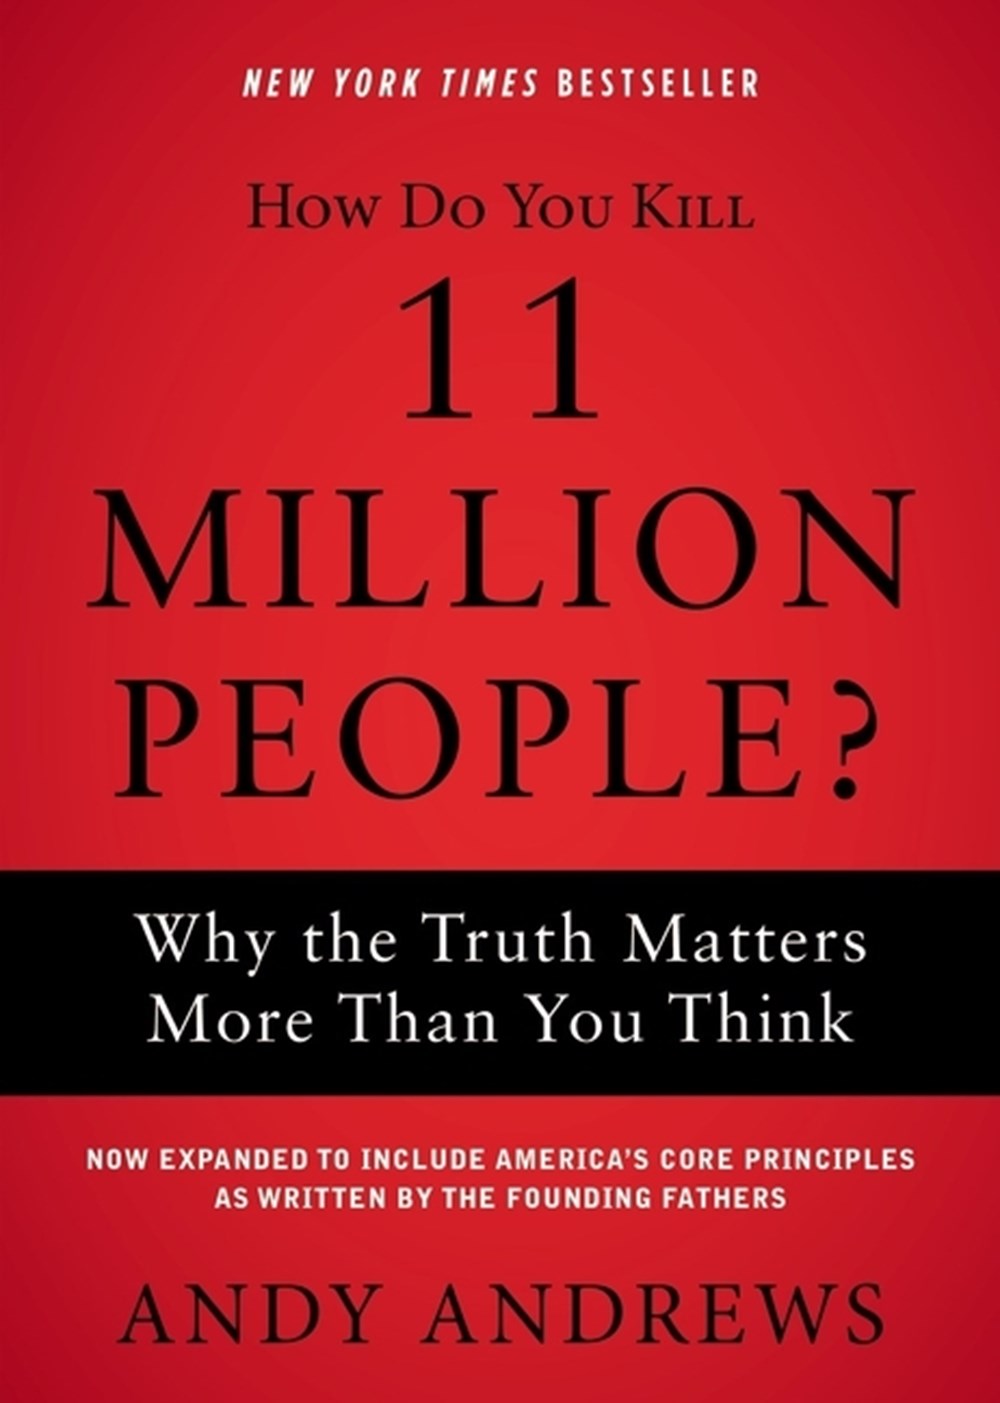 How Do You Kill 11 Million People?: Why the Truth Matters More Than You Think (Expanded)